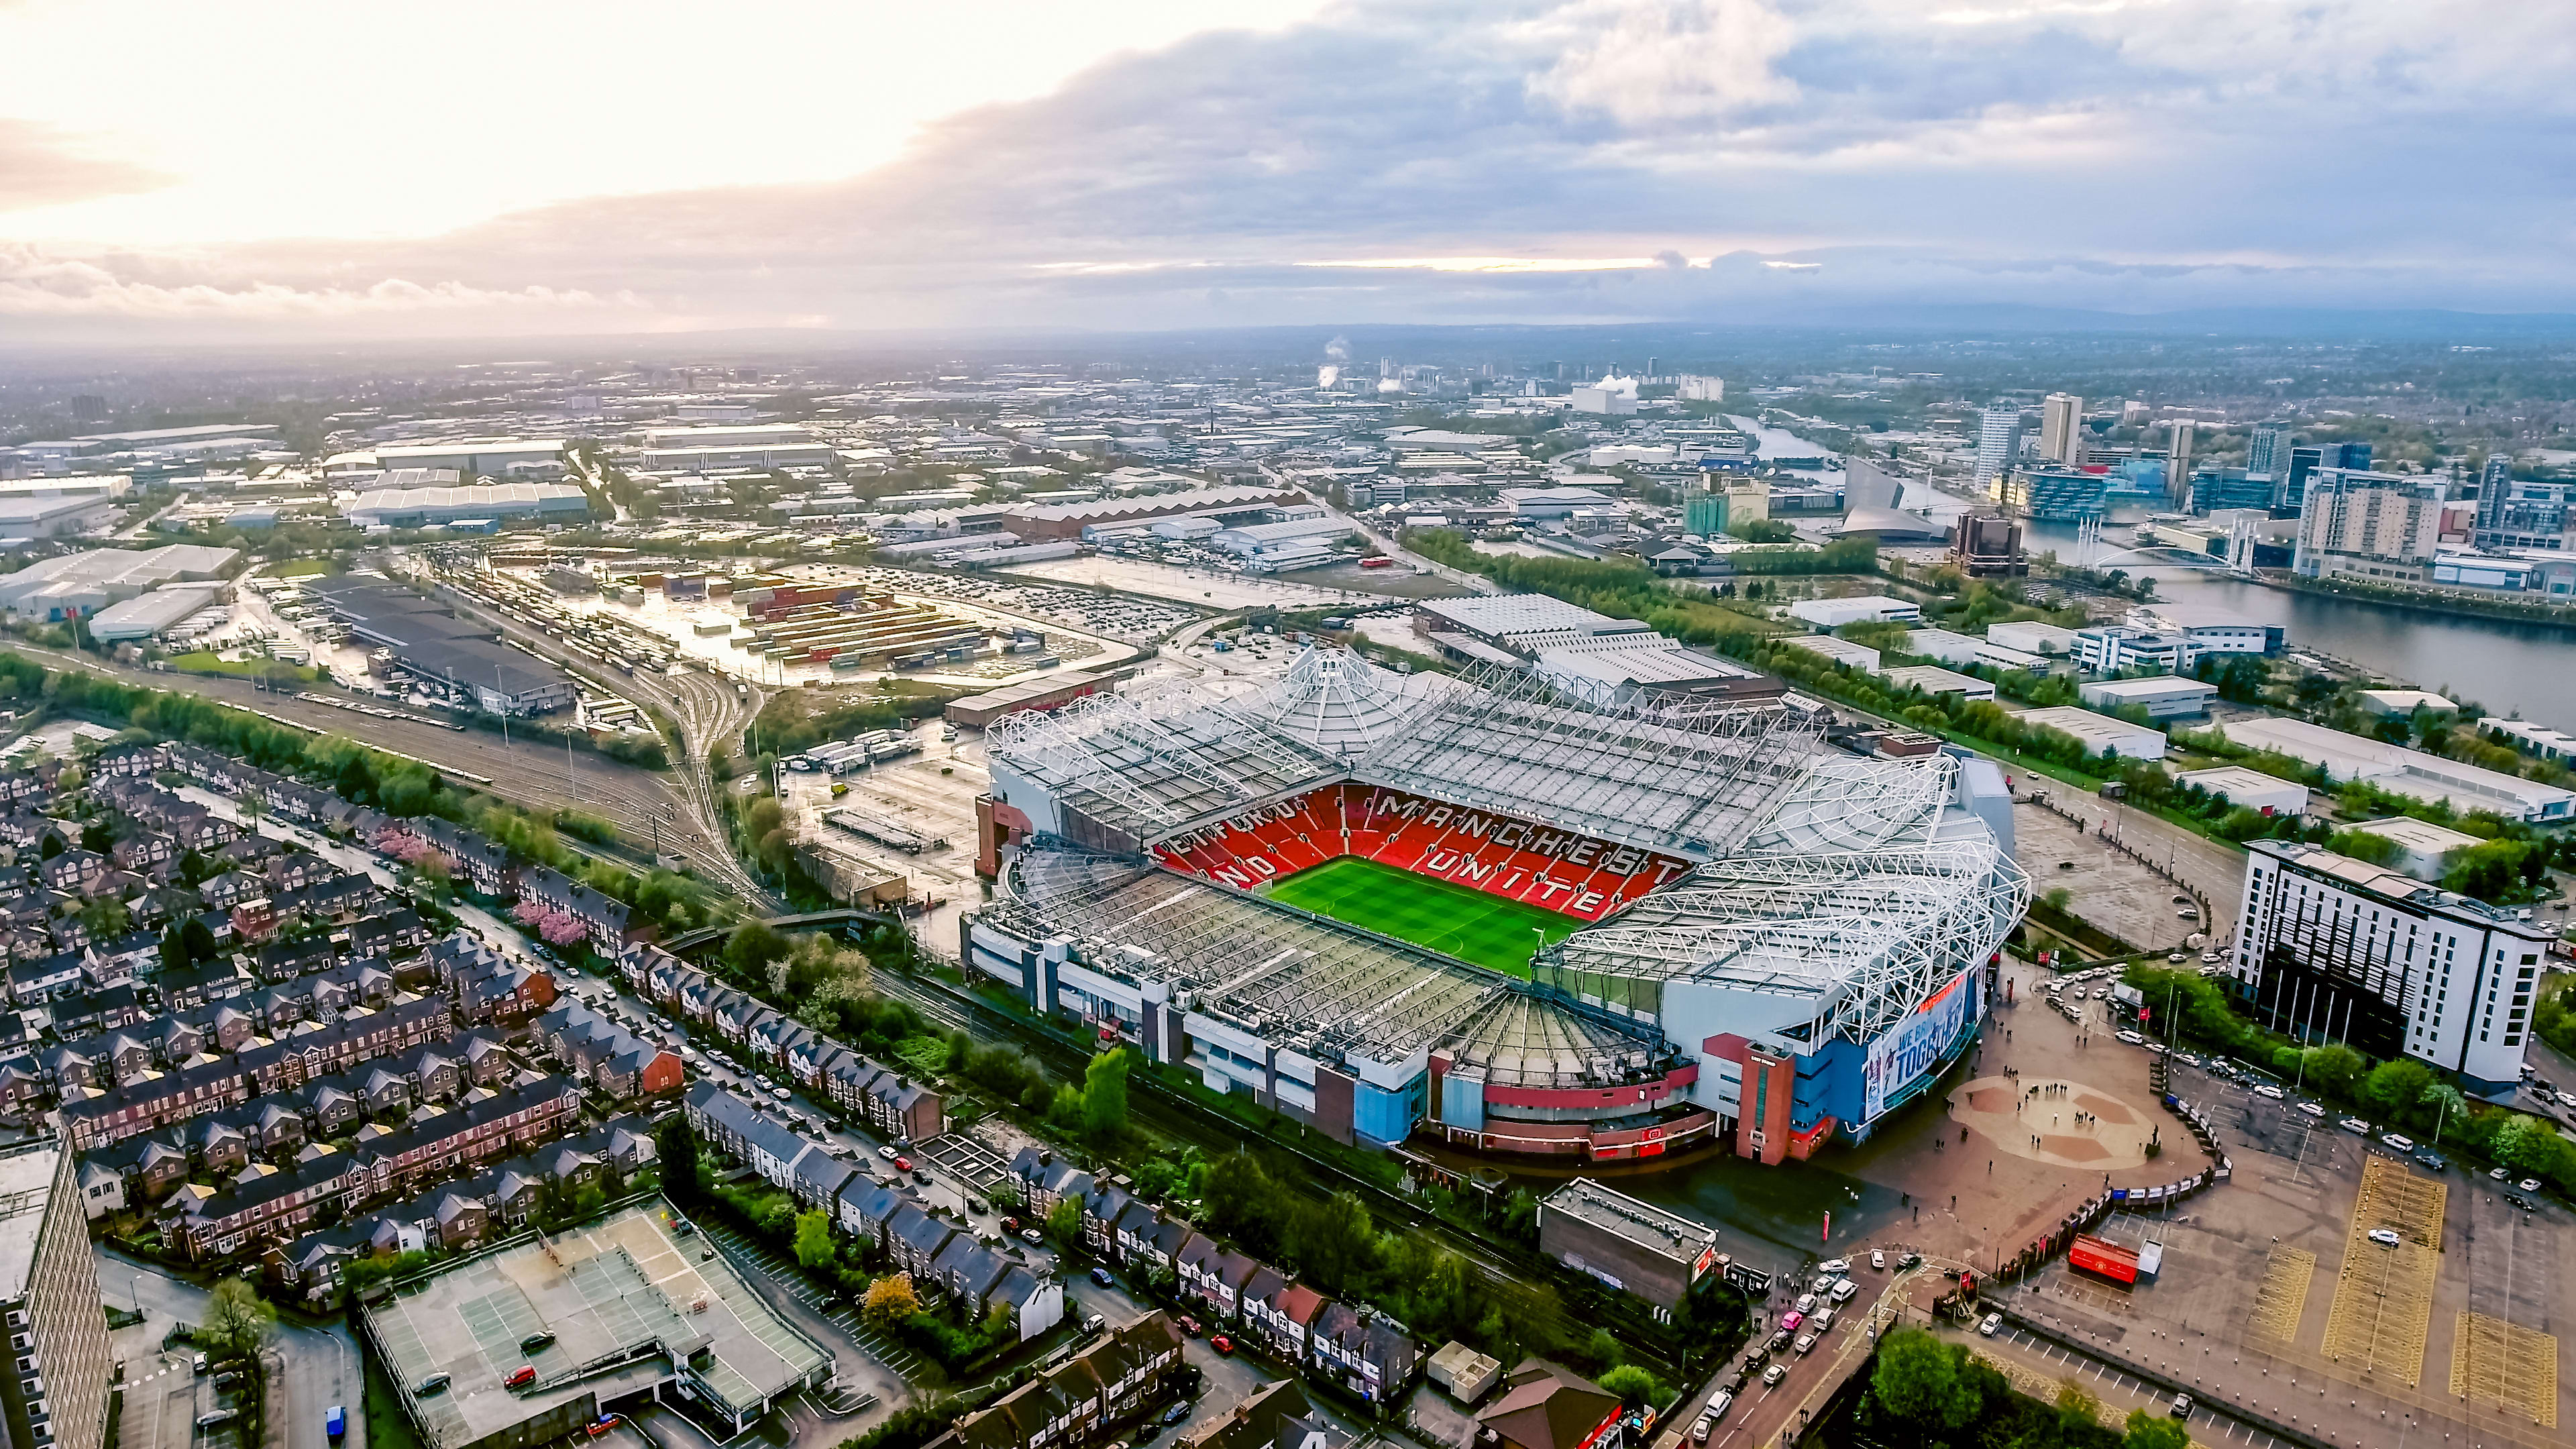 Birdseye view of Old Trafford Stadium and the surrounding areas